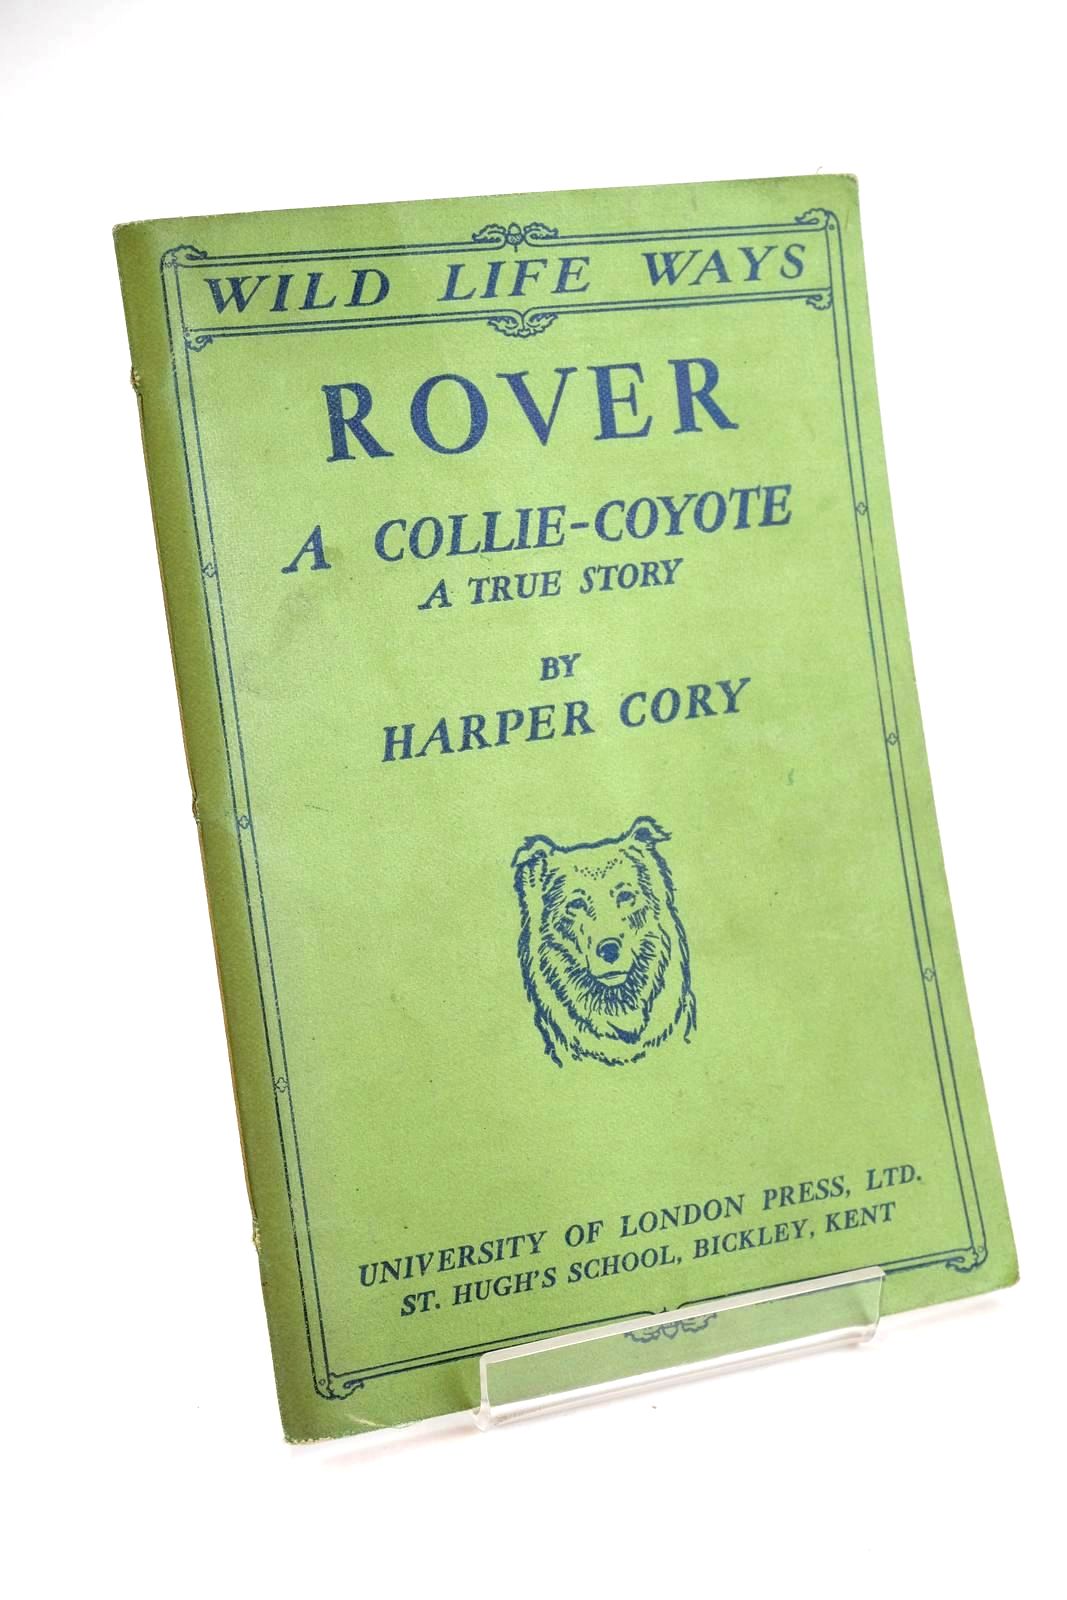 Photo of ROVER: A COLLIE-COYOTE written by Cory, Harper illustrated by Parker, W.N. published by University of London Press Ltd. (STOCK CODE: 1328047)  for sale by Stella & Rose's Books